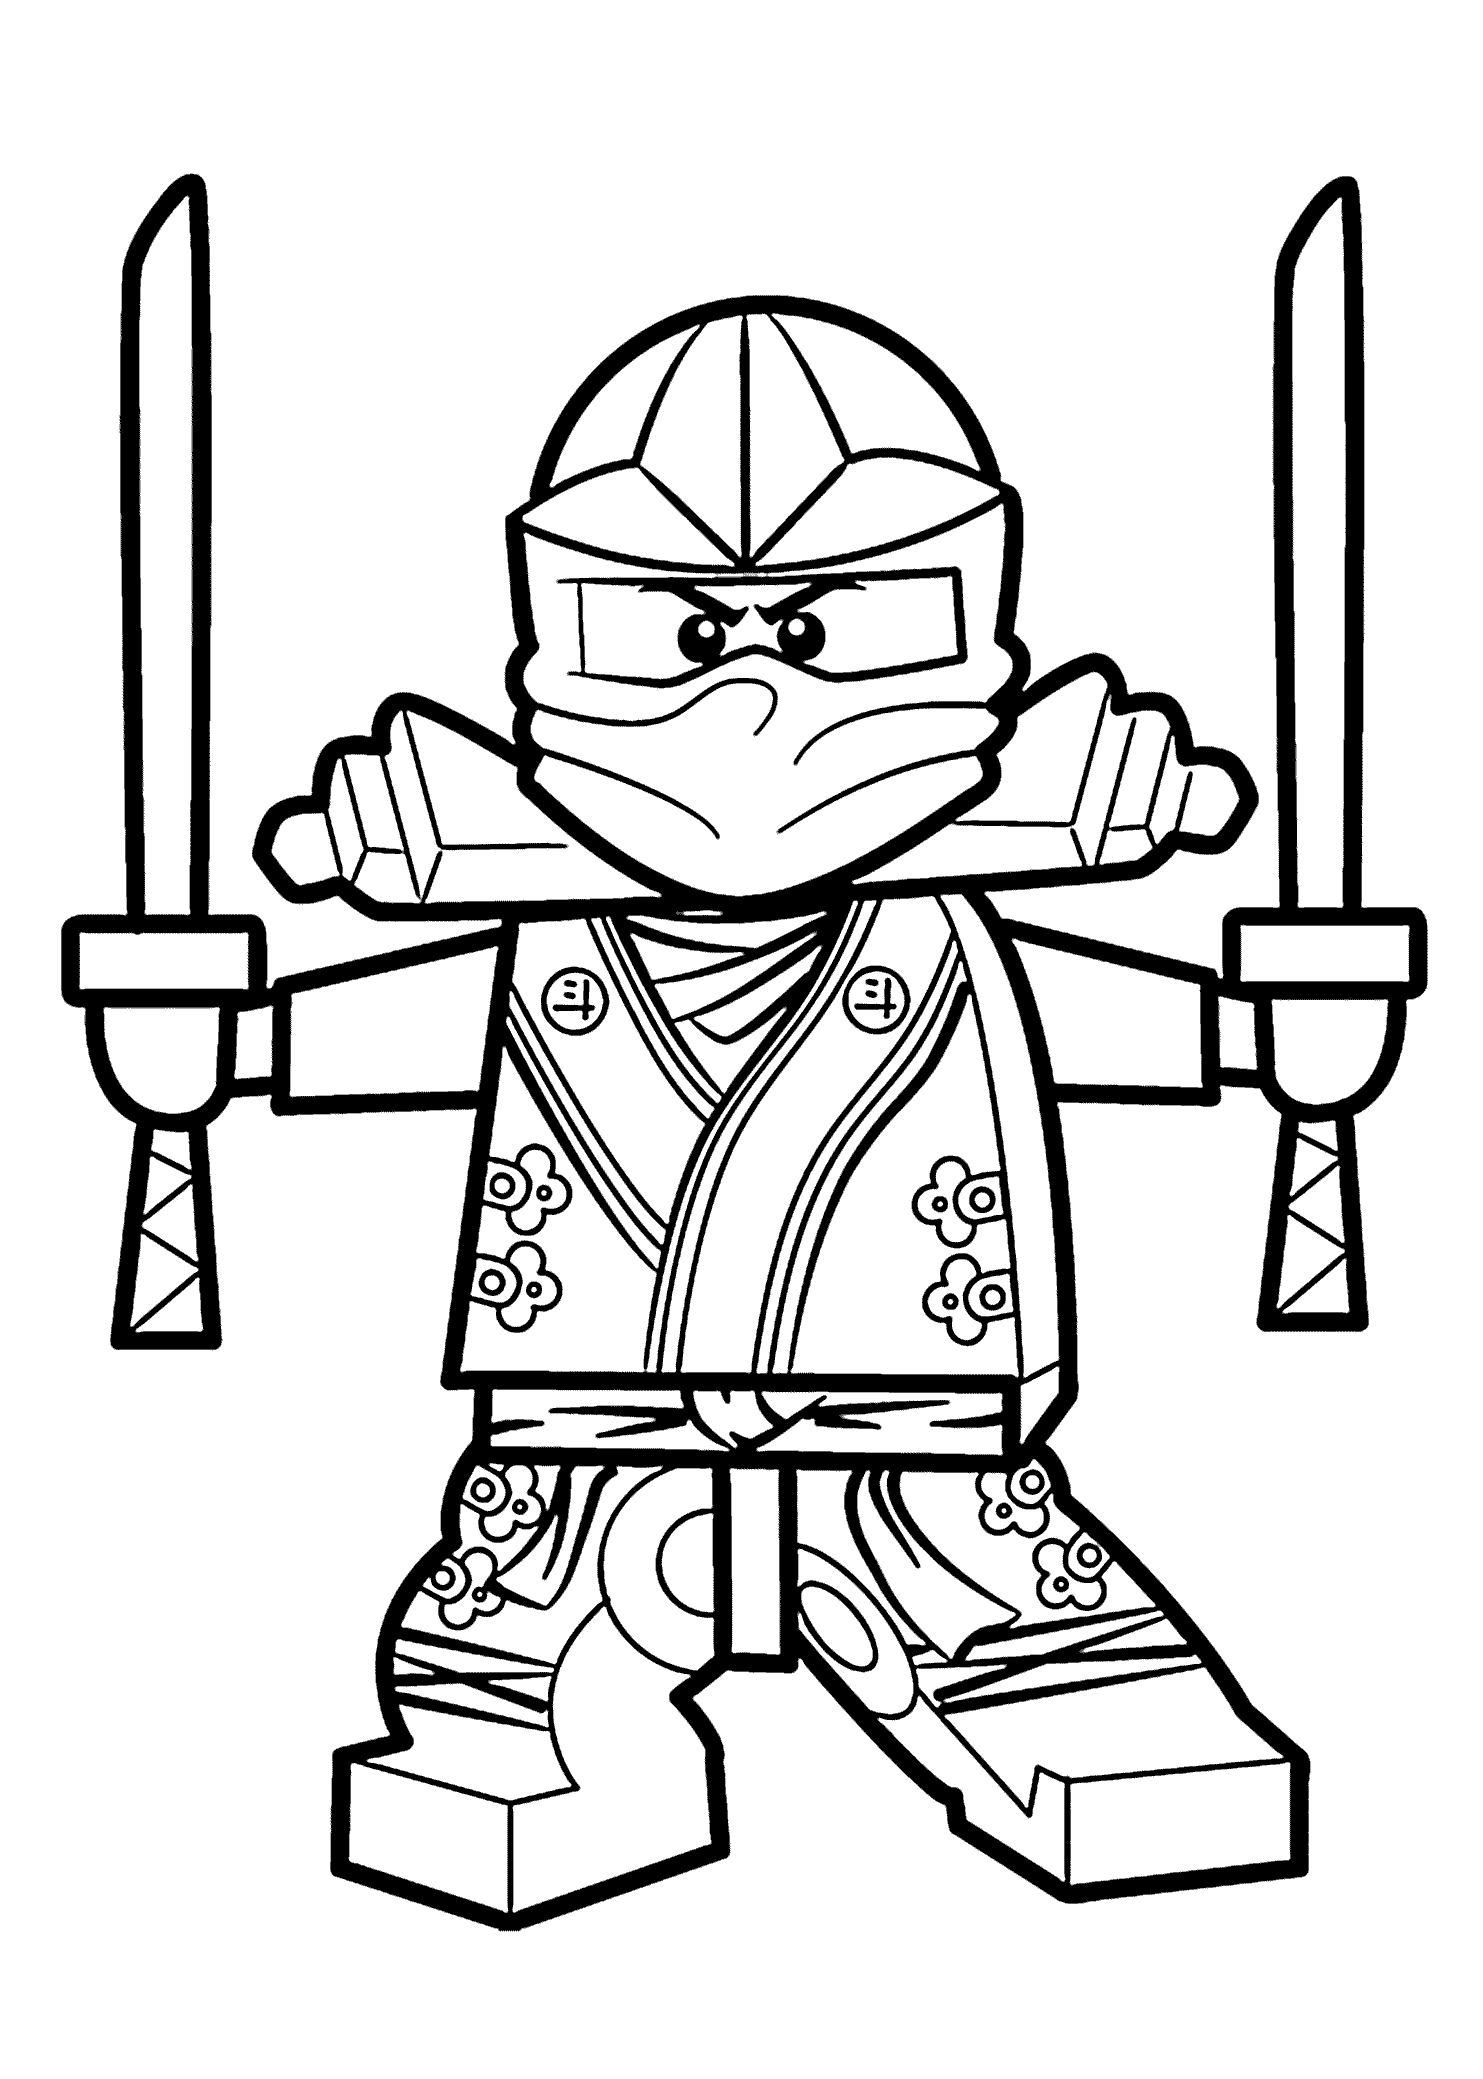 kai coloring pages lego coloring pages wecoloringpagecom coloring pages kai 